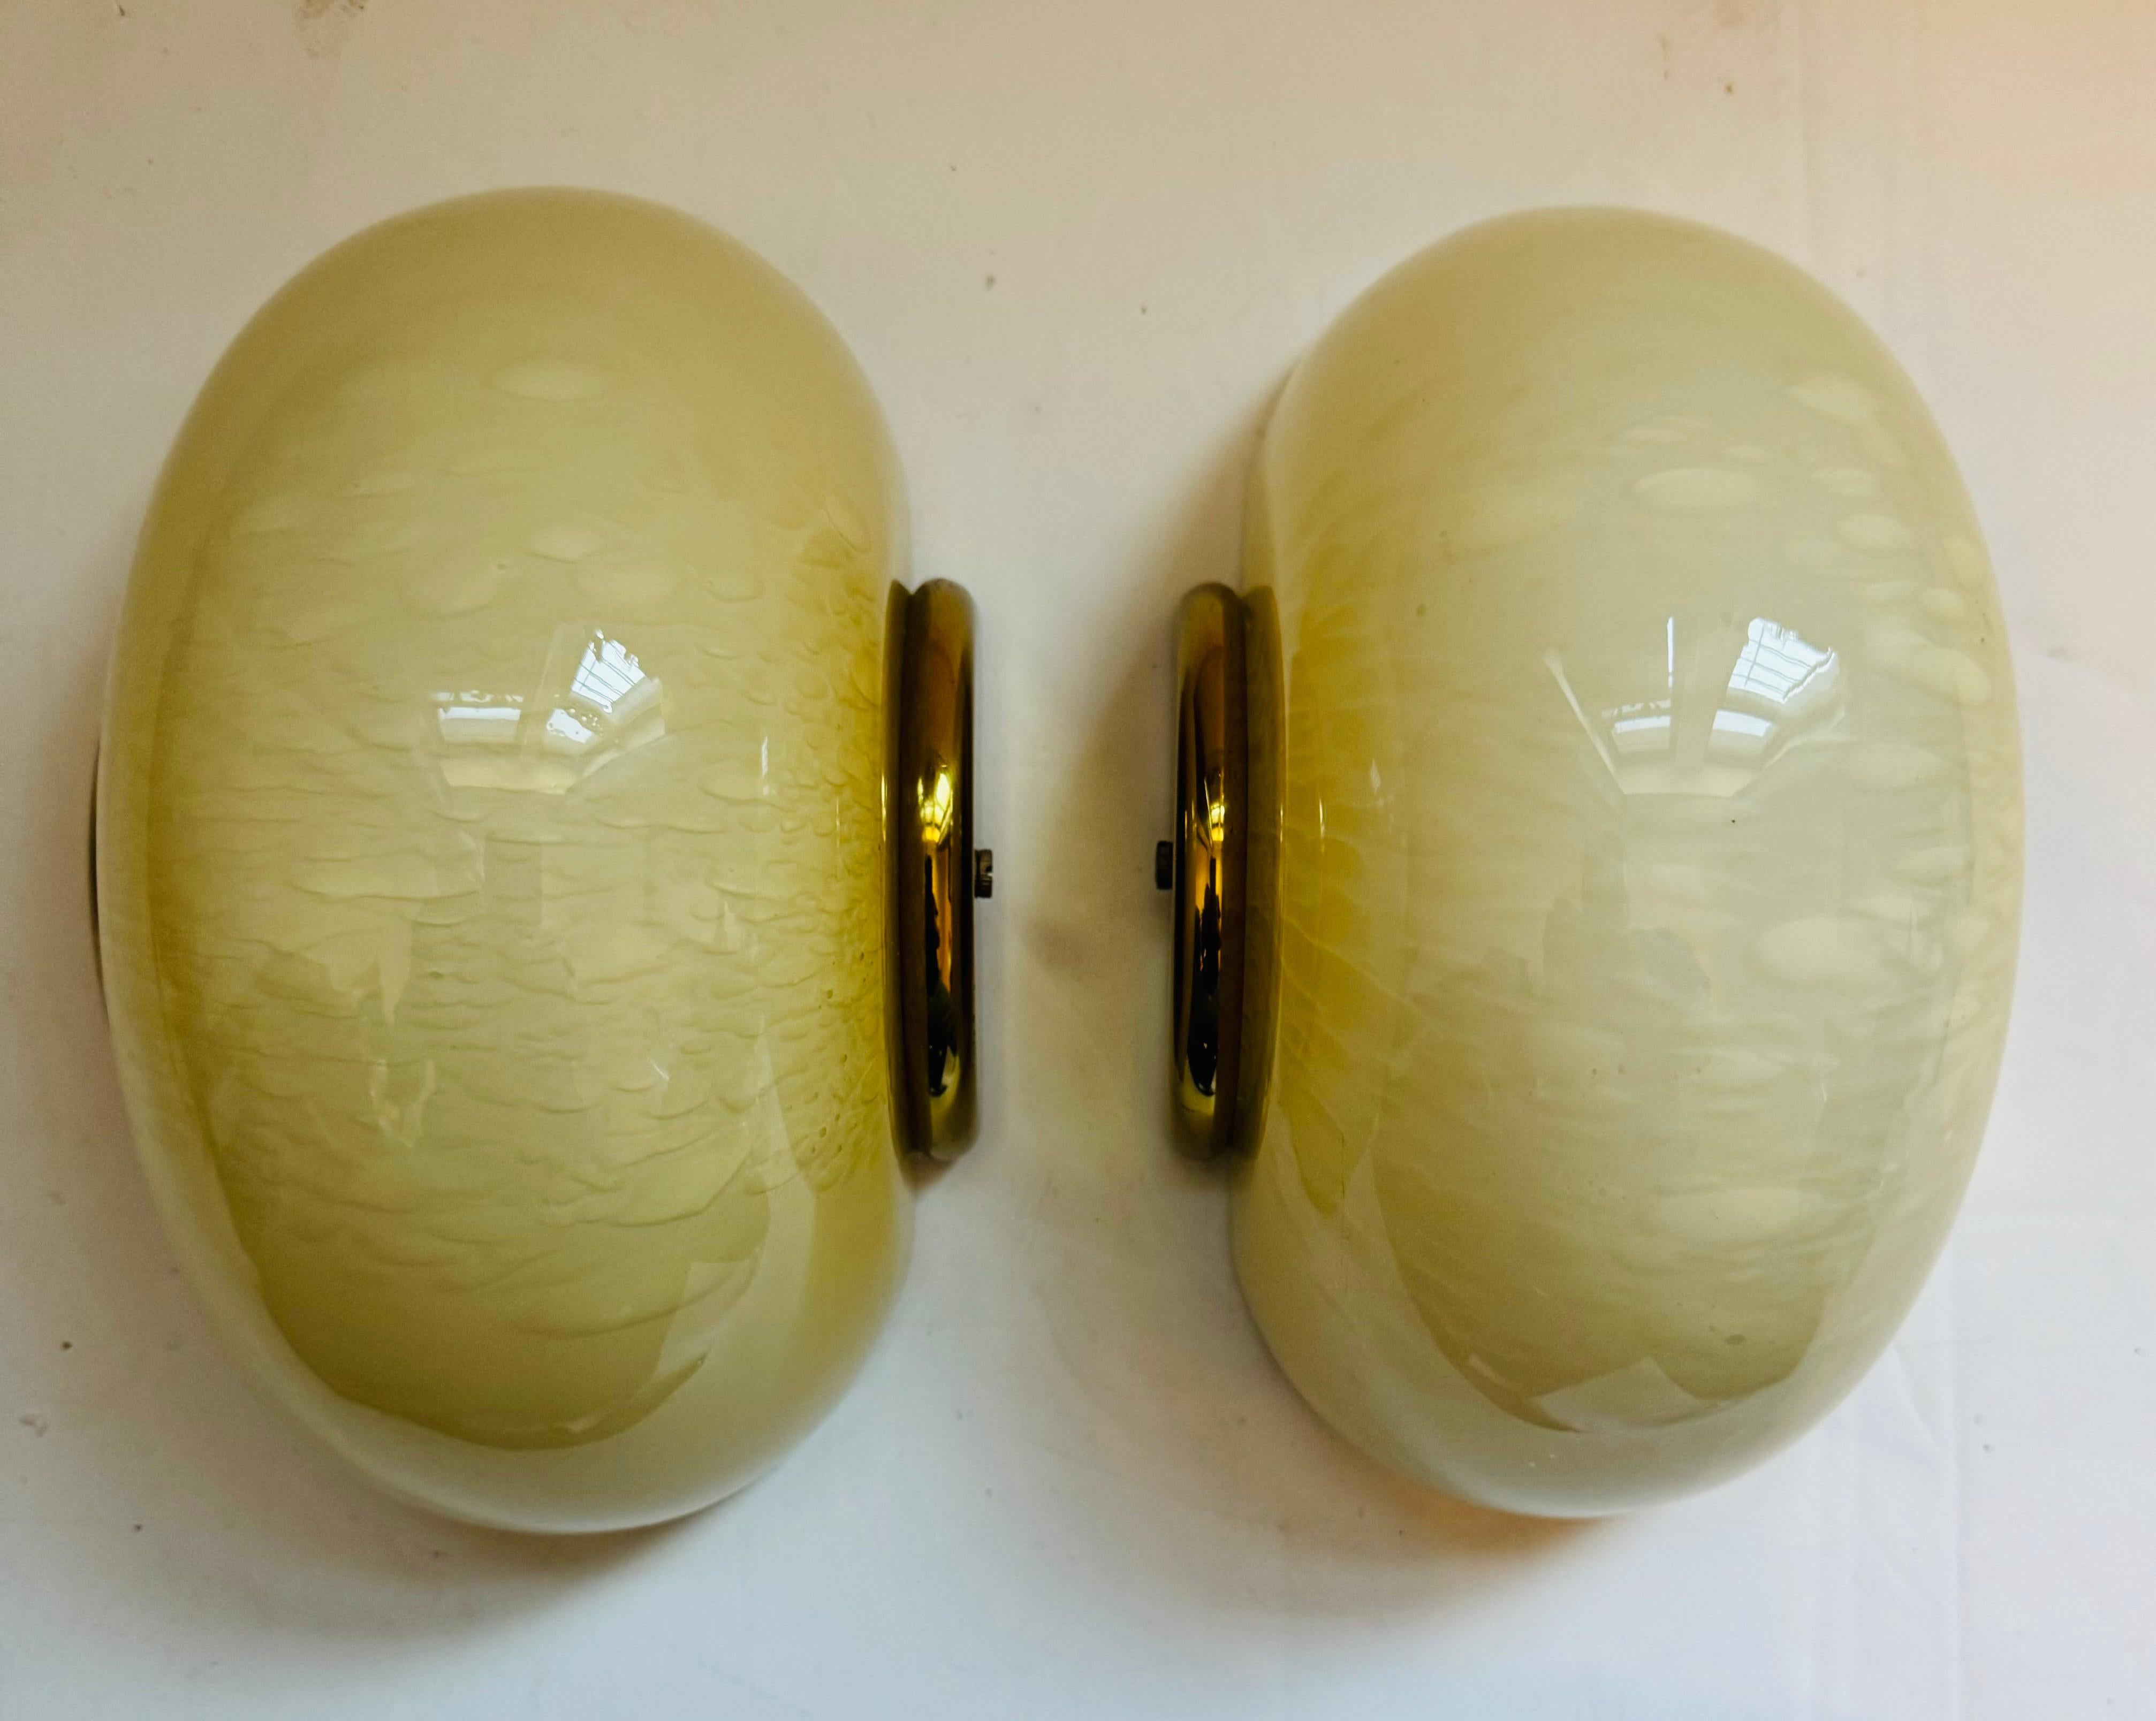 A handsome pair of light custard Murano egg shaped wall lamps with half moon brass fittings. 1970s Italian by lighting maker, Fabbian. Can be installed vertical or horizontal.